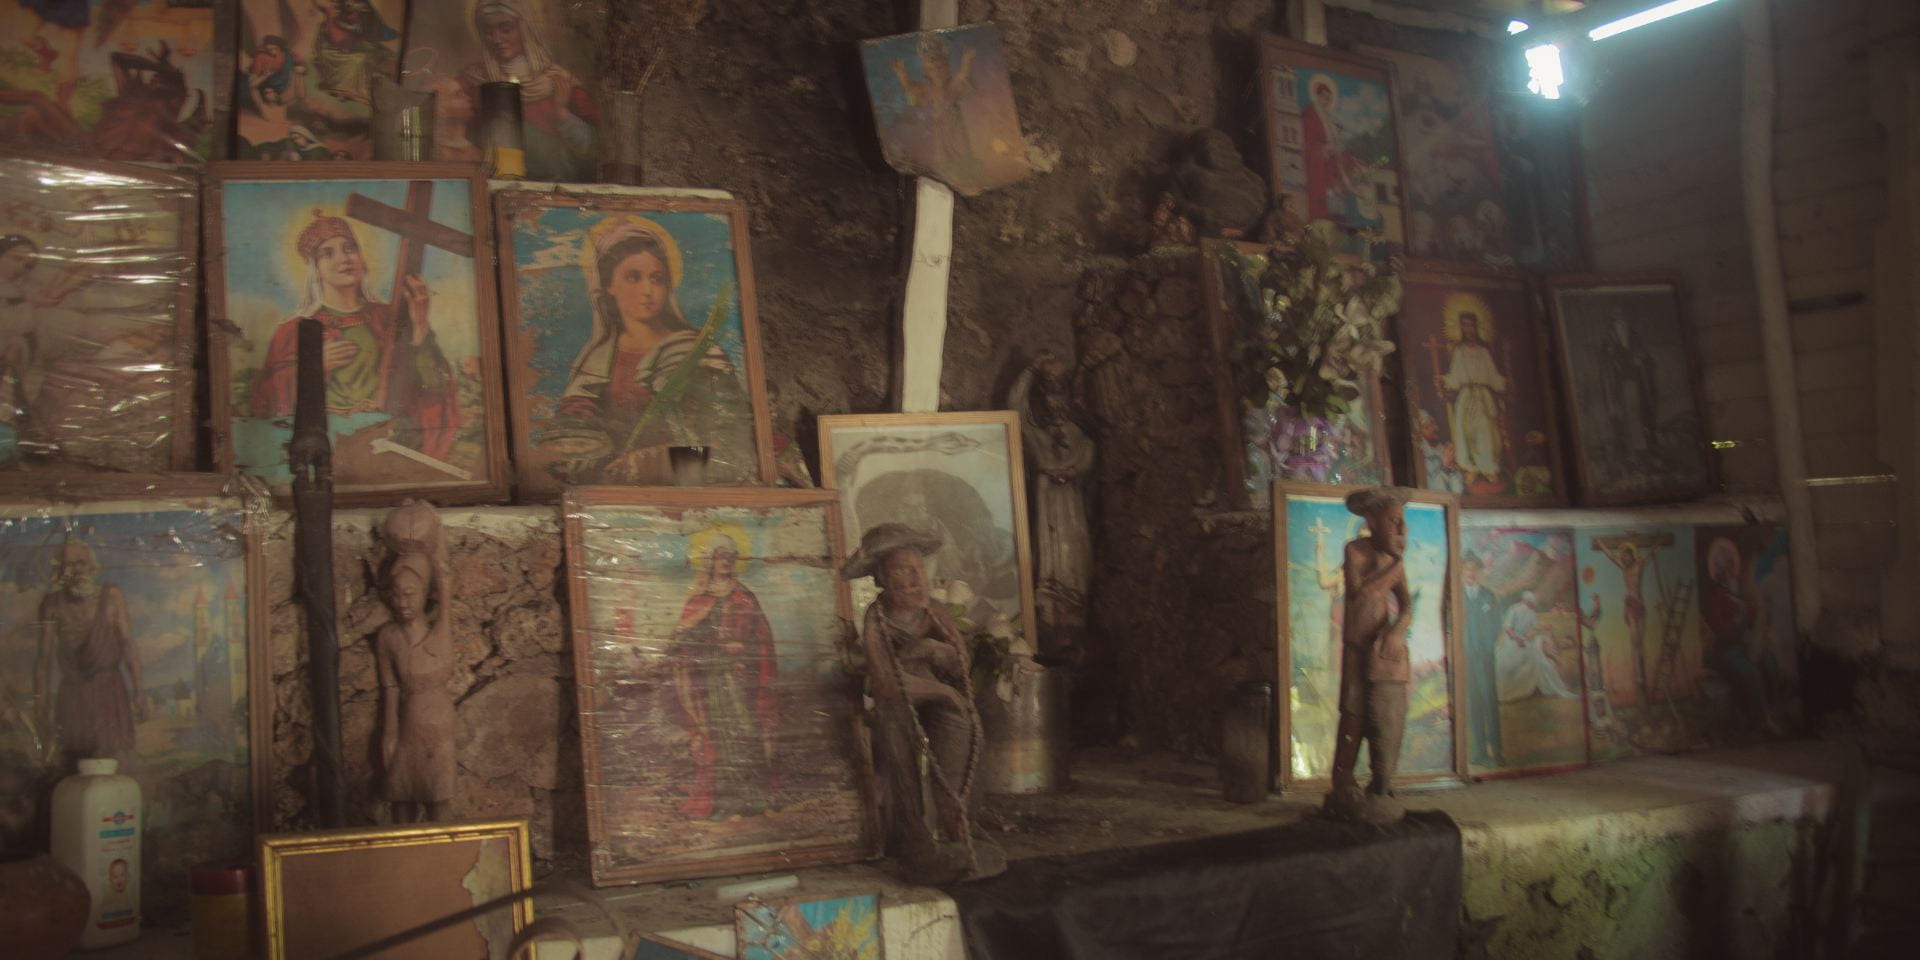 Large framed images lie against a rocky natural wall, arranged among candles and small statues.